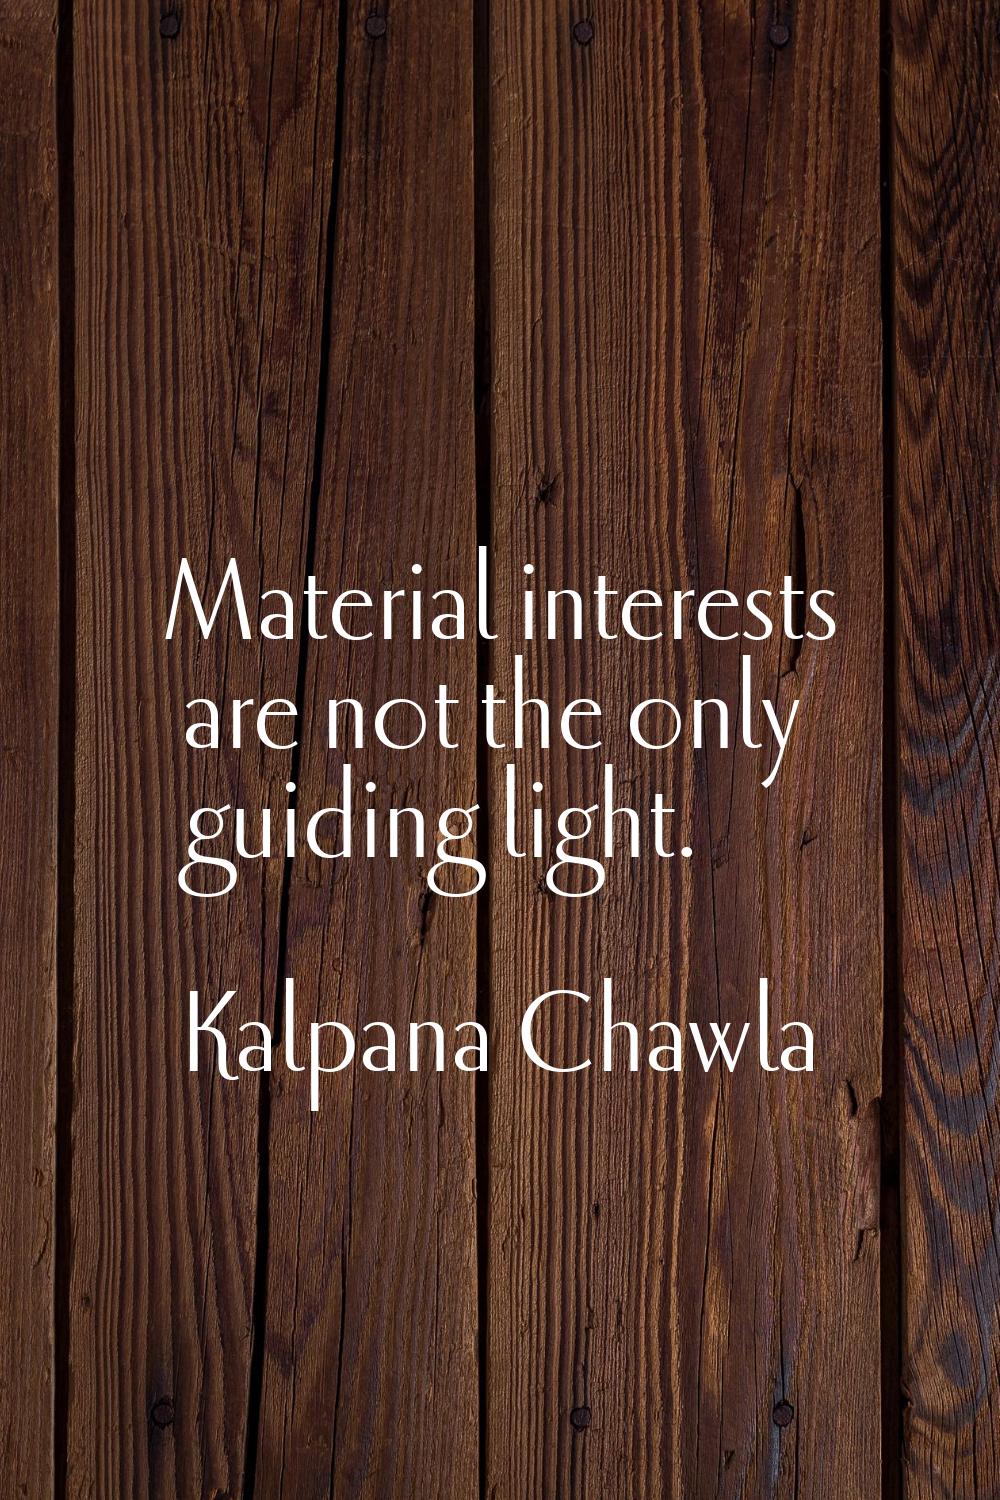 Material interests are not the only guiding light.